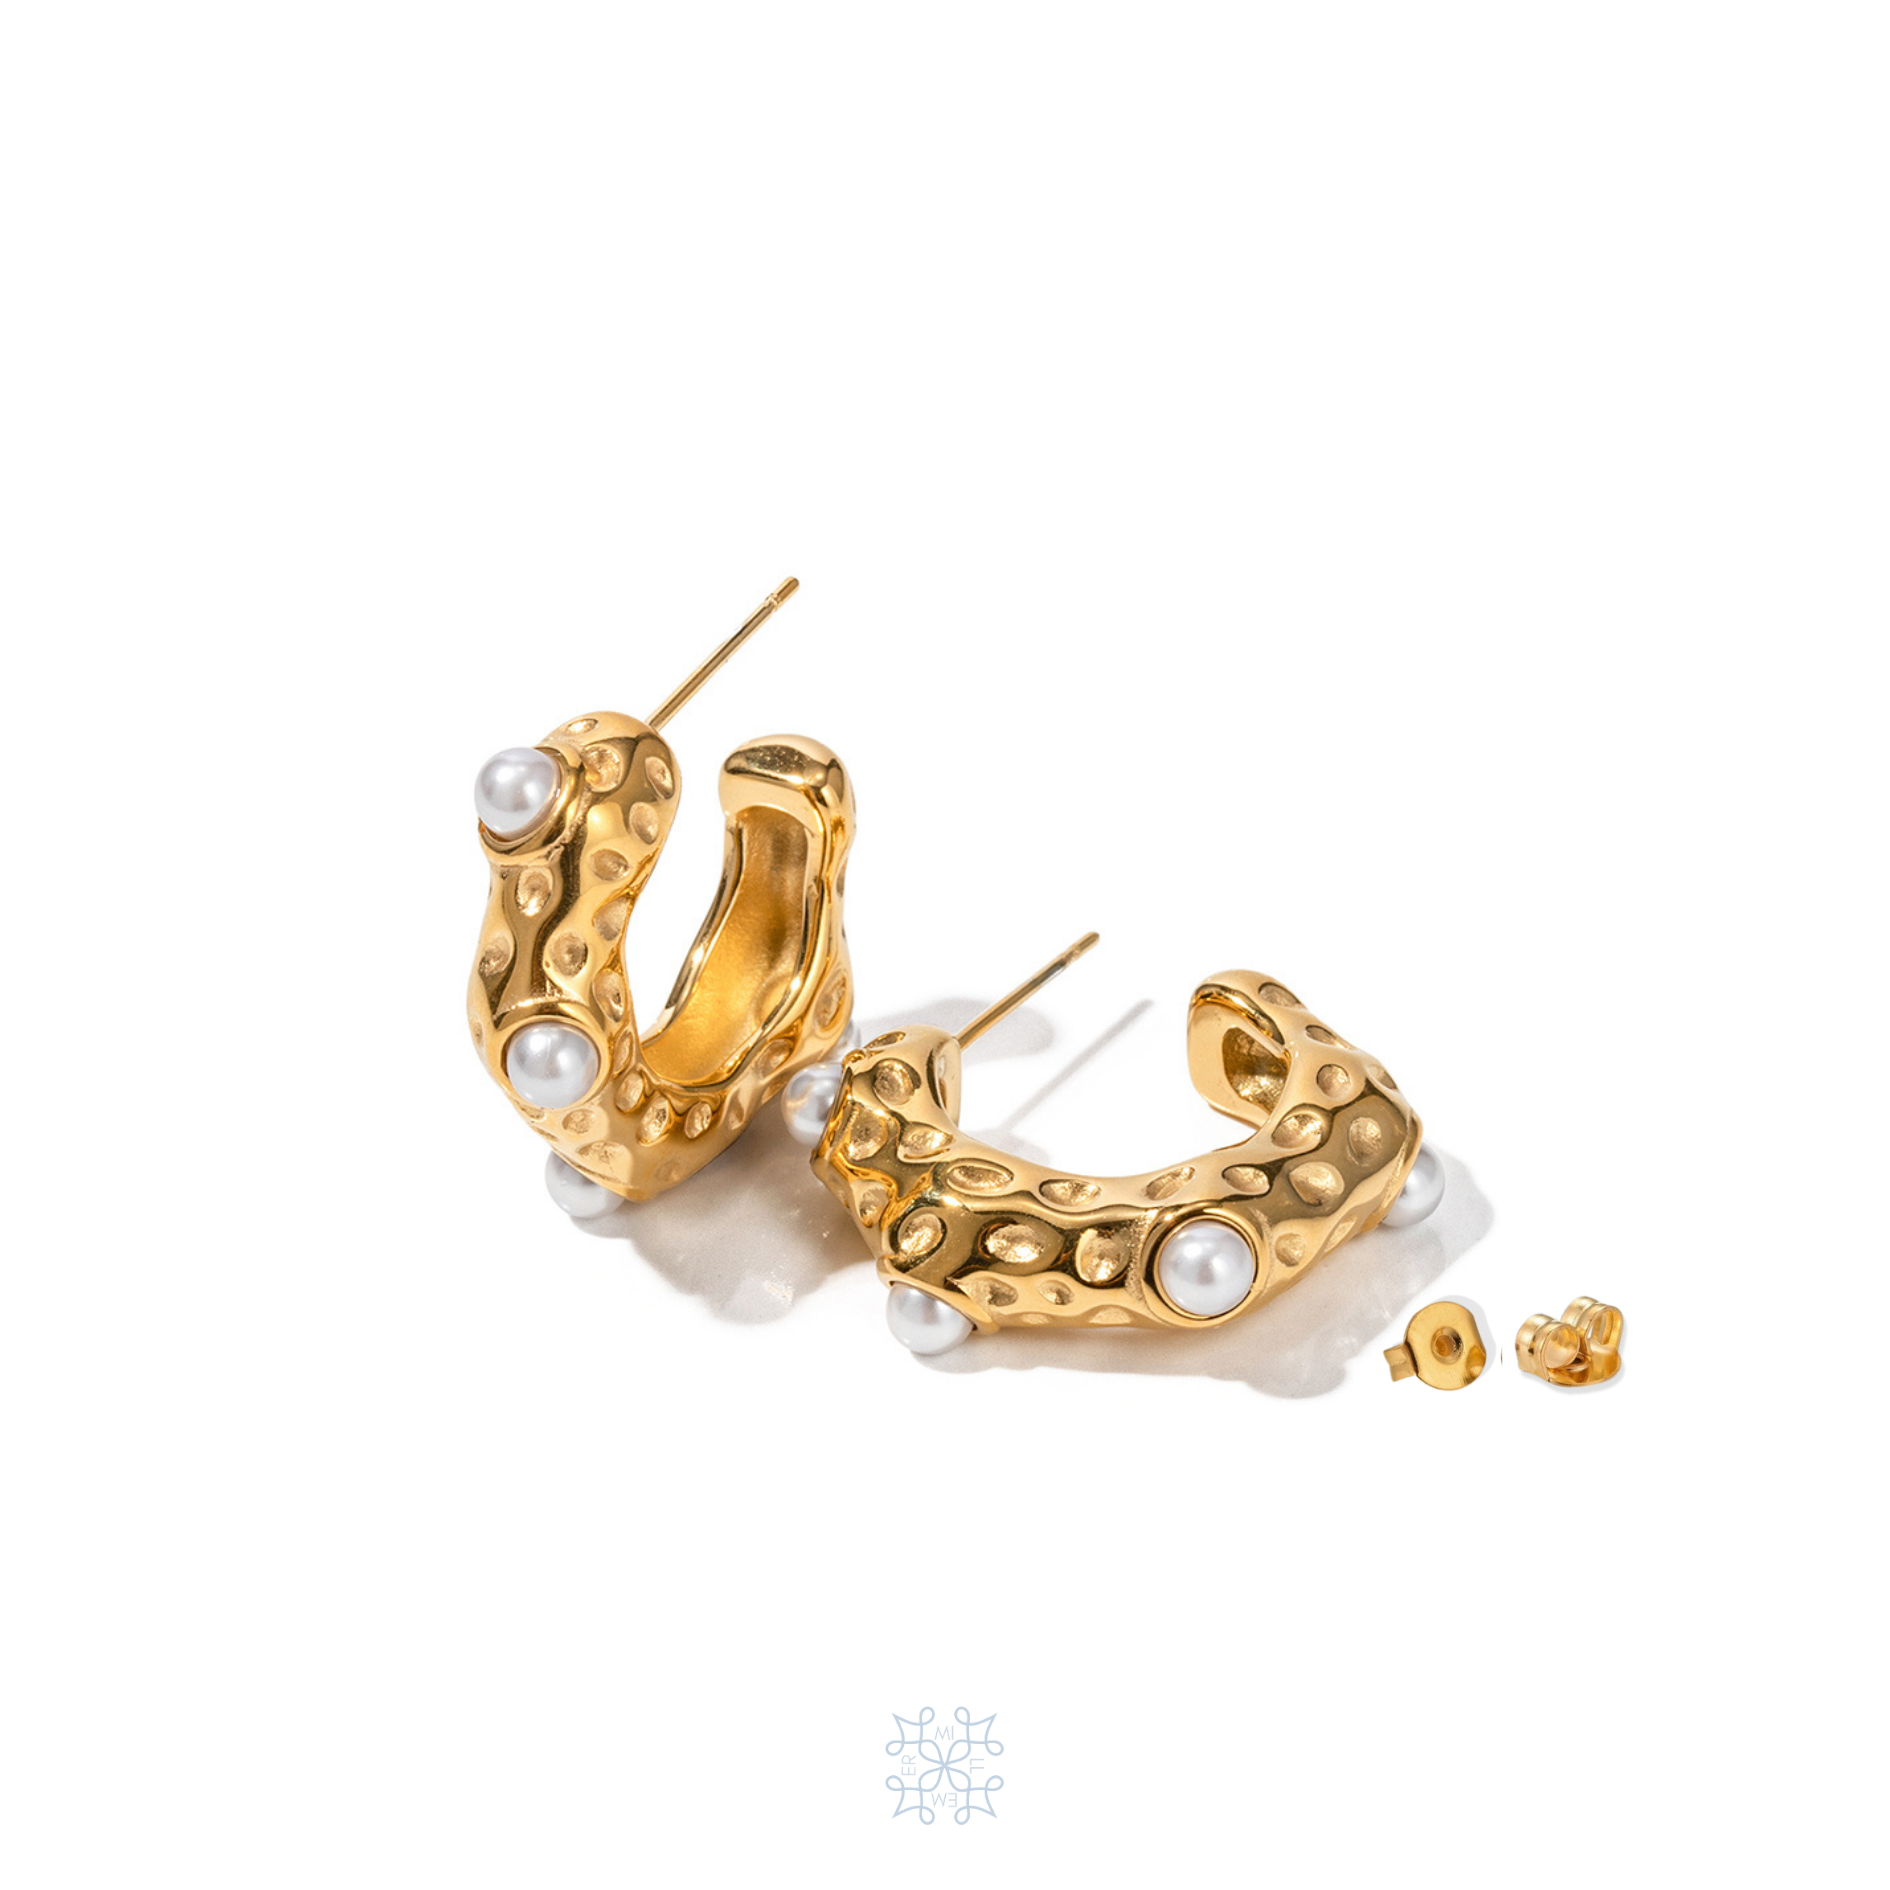 Gold Plated Half Hoop Earrings, Irregular shape resembling the water drops on a dune desert surface, white pearls added in every earring.   